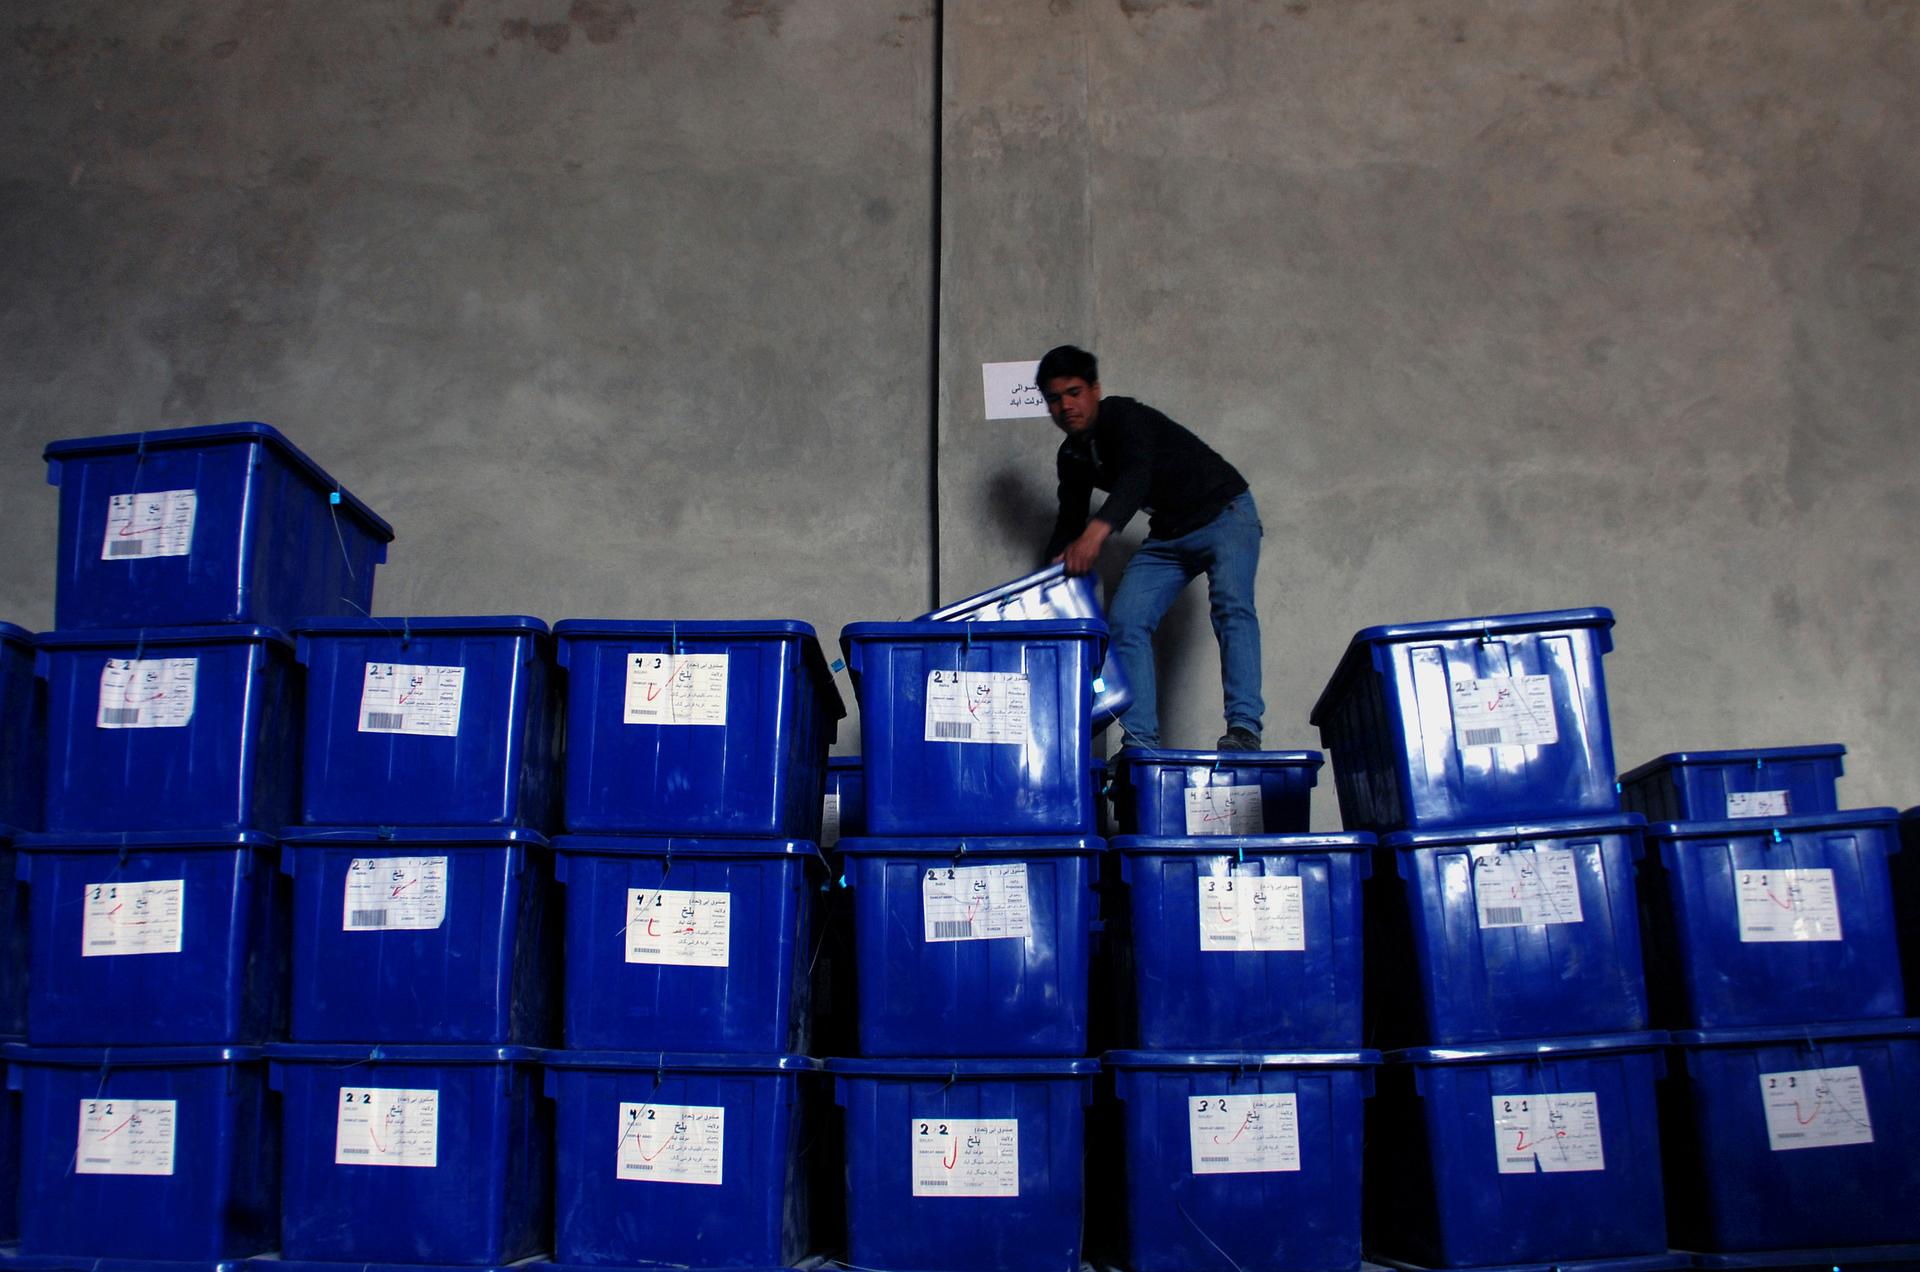 An Afghan election commission worker arranges boxes containing election material in Mazar-I-Shariff April 1, 2014.The Afghan presidential elections will be held on April 5.